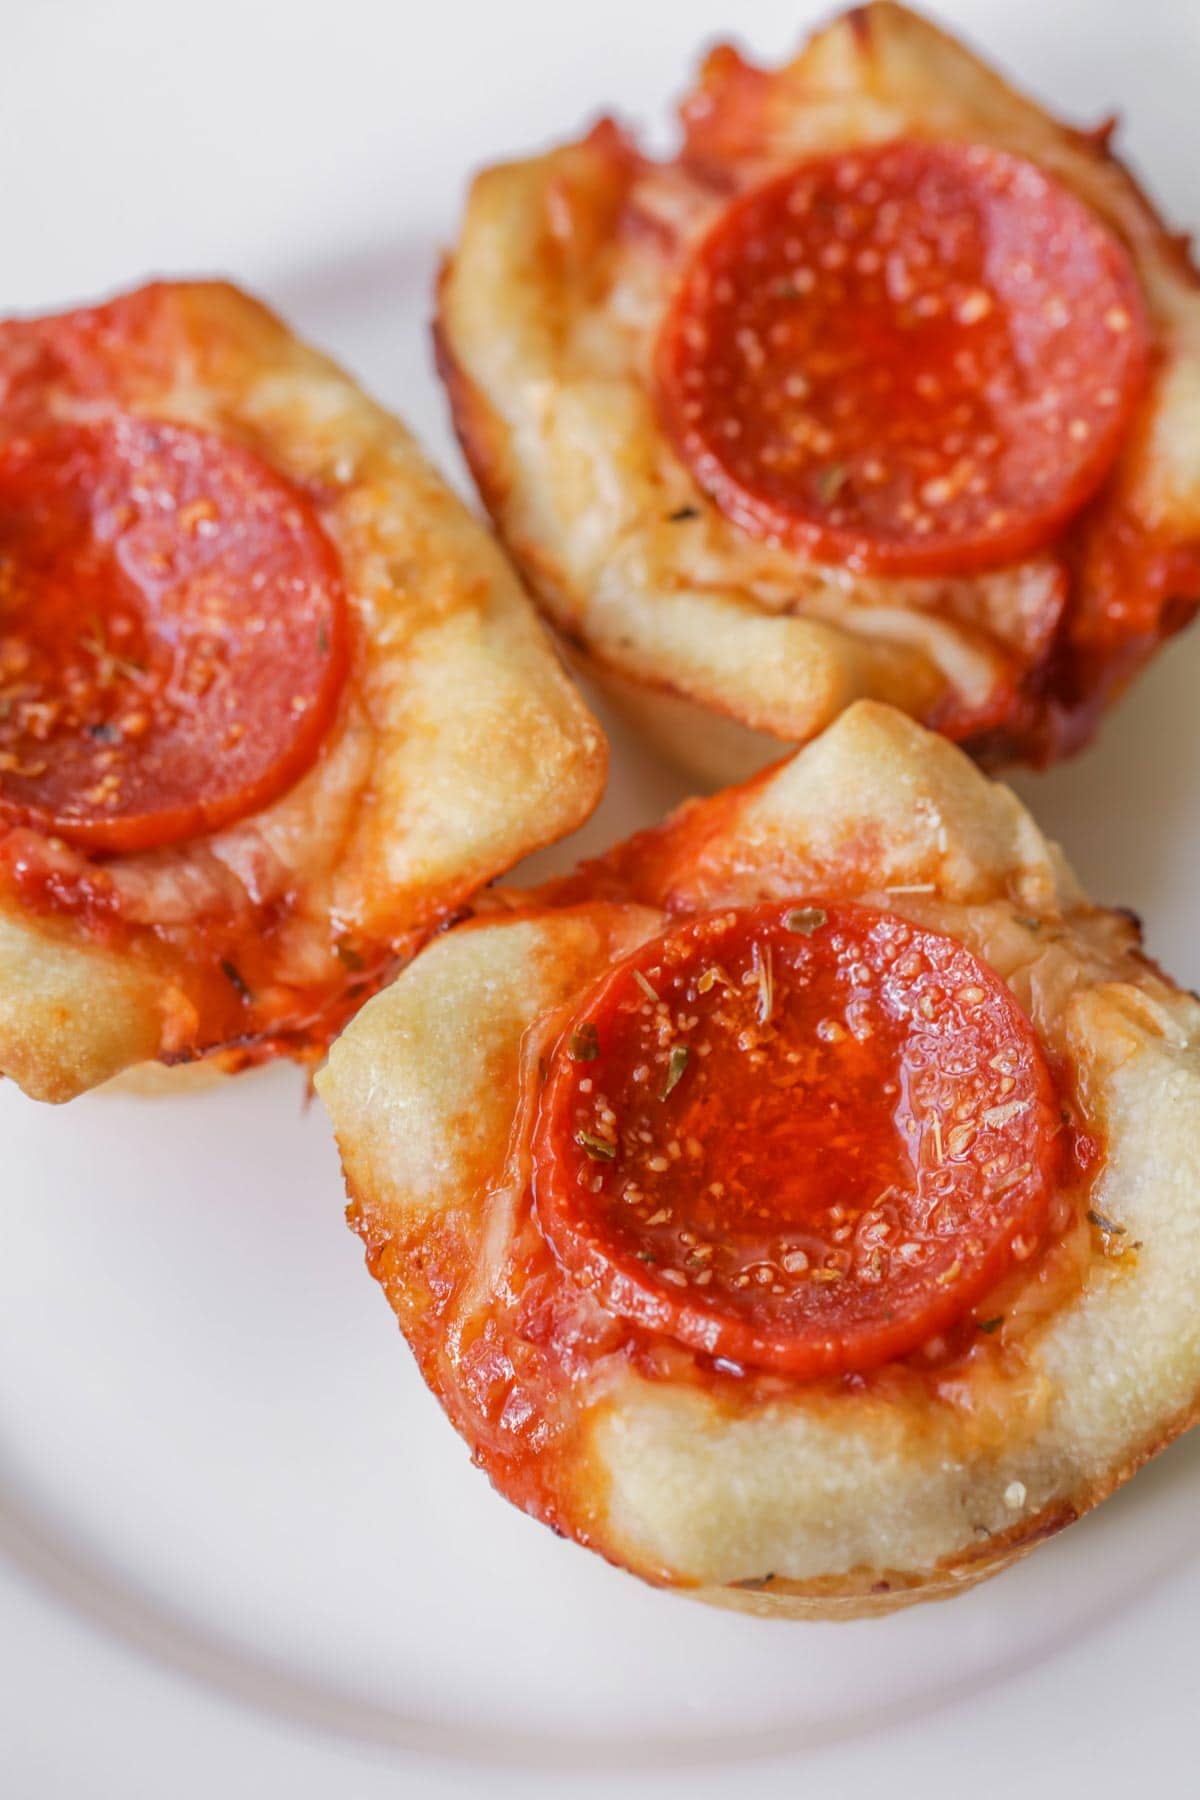 Italian Christmas Dinner ideas - close up of 3 mini deep dish pizzas topped with pepperoni.